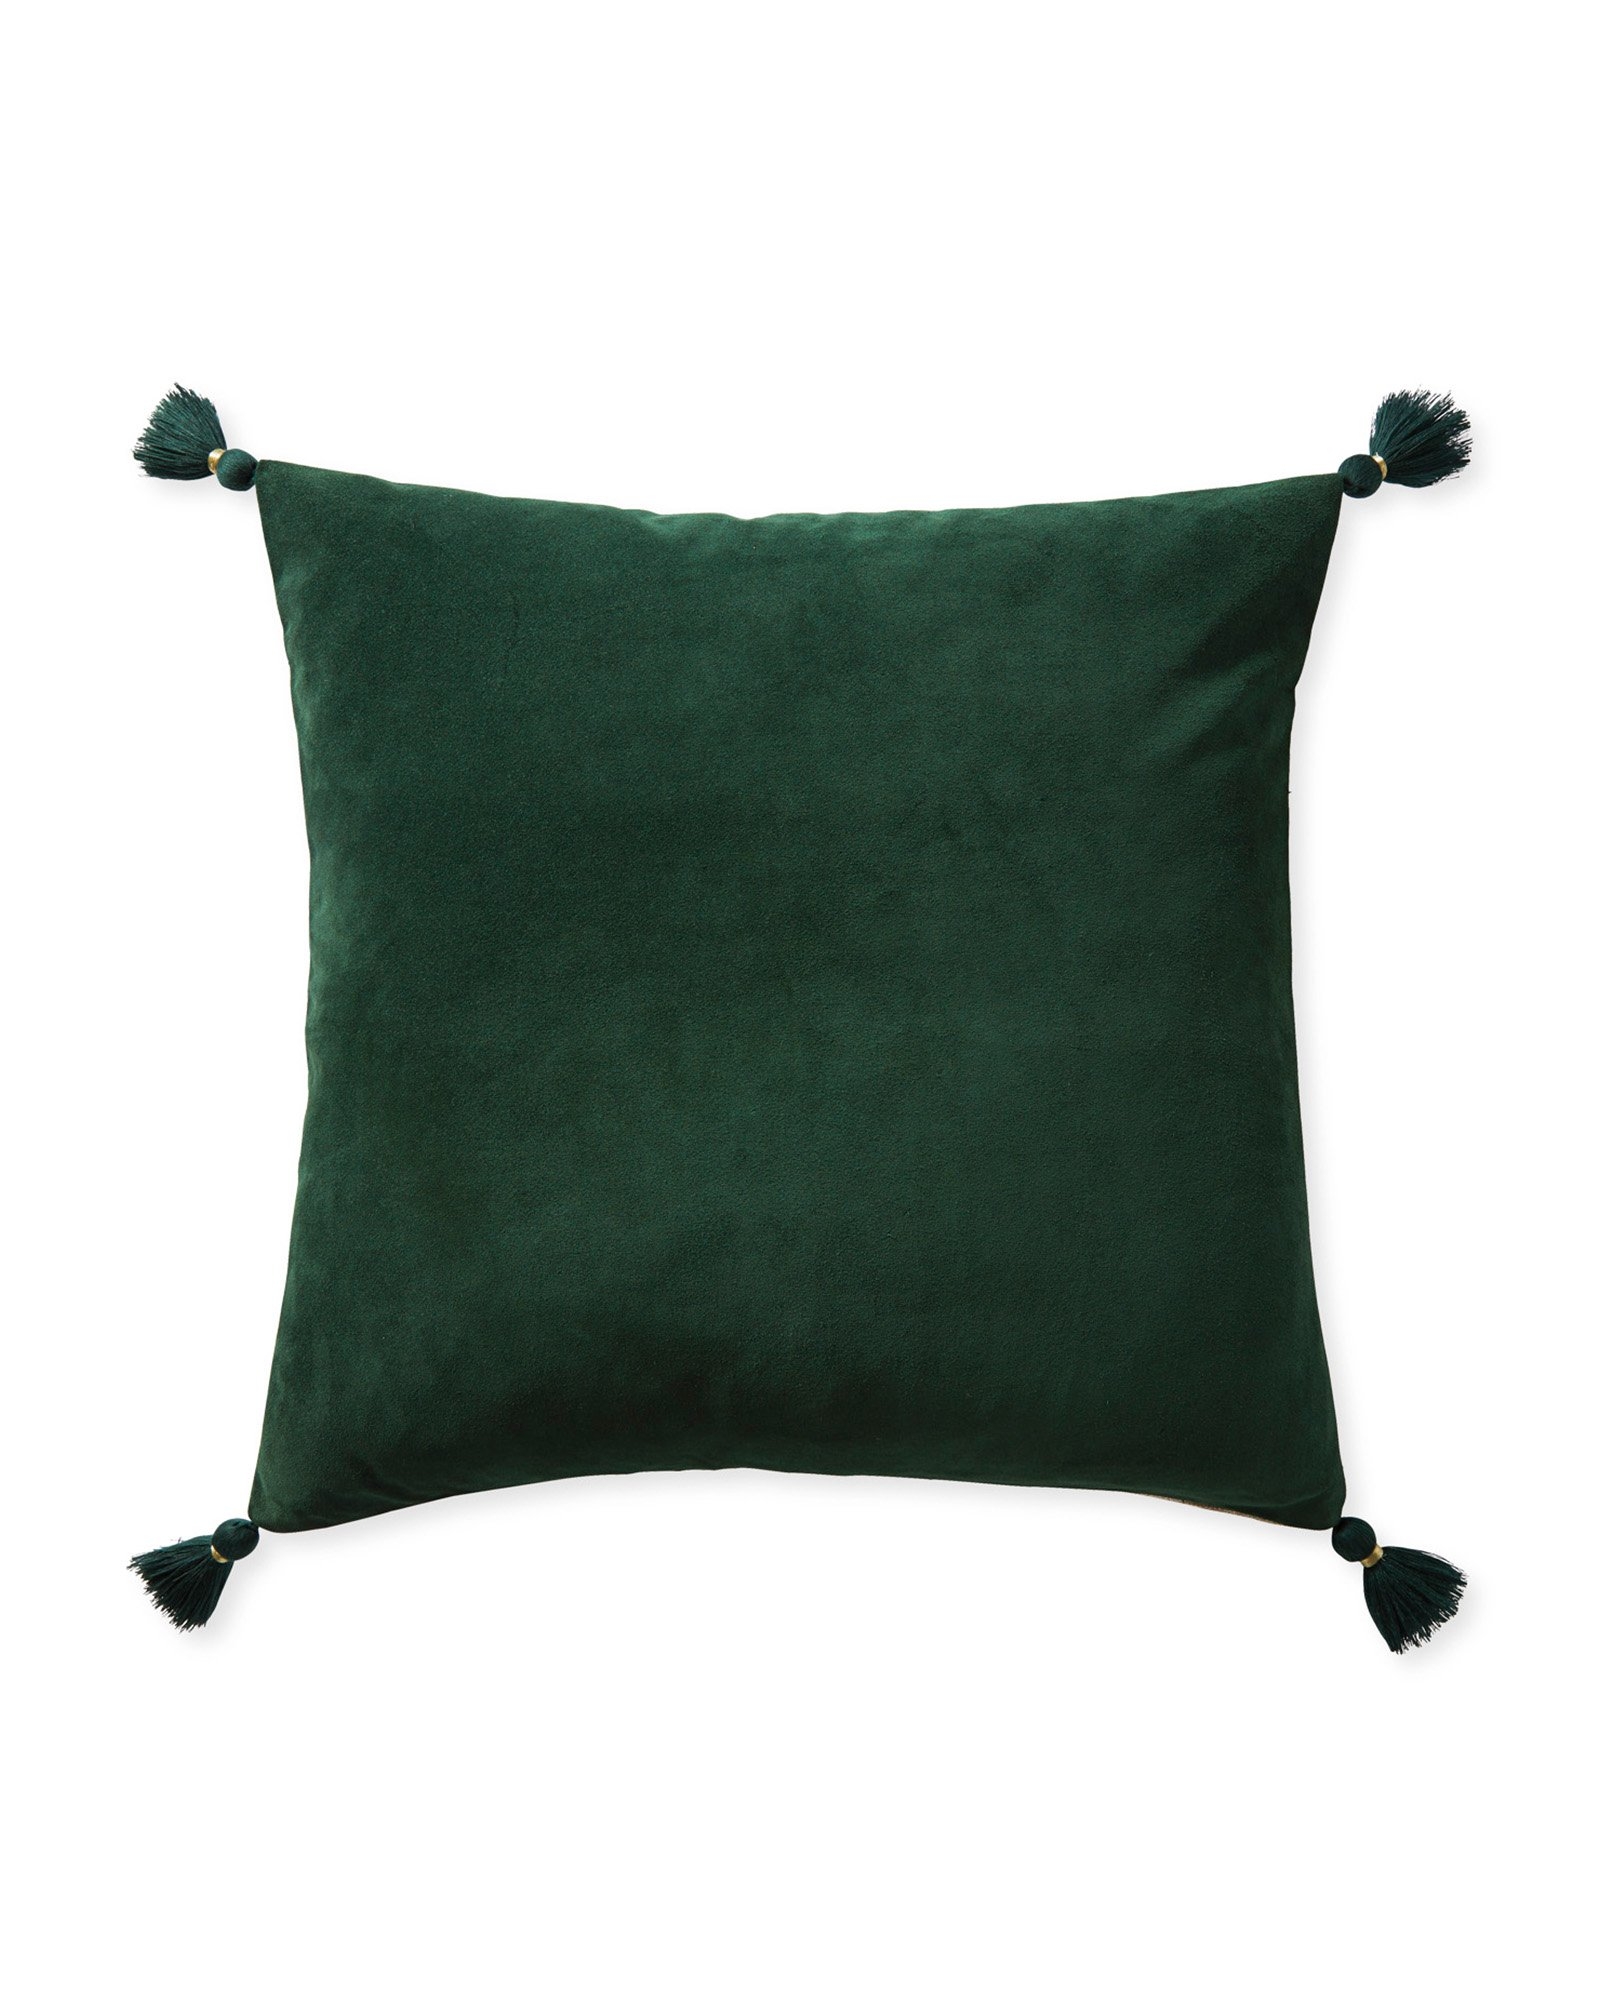 Suede Eva 20" SQ Pillow Cover - Evergreen - Insert sold separately - Image 0